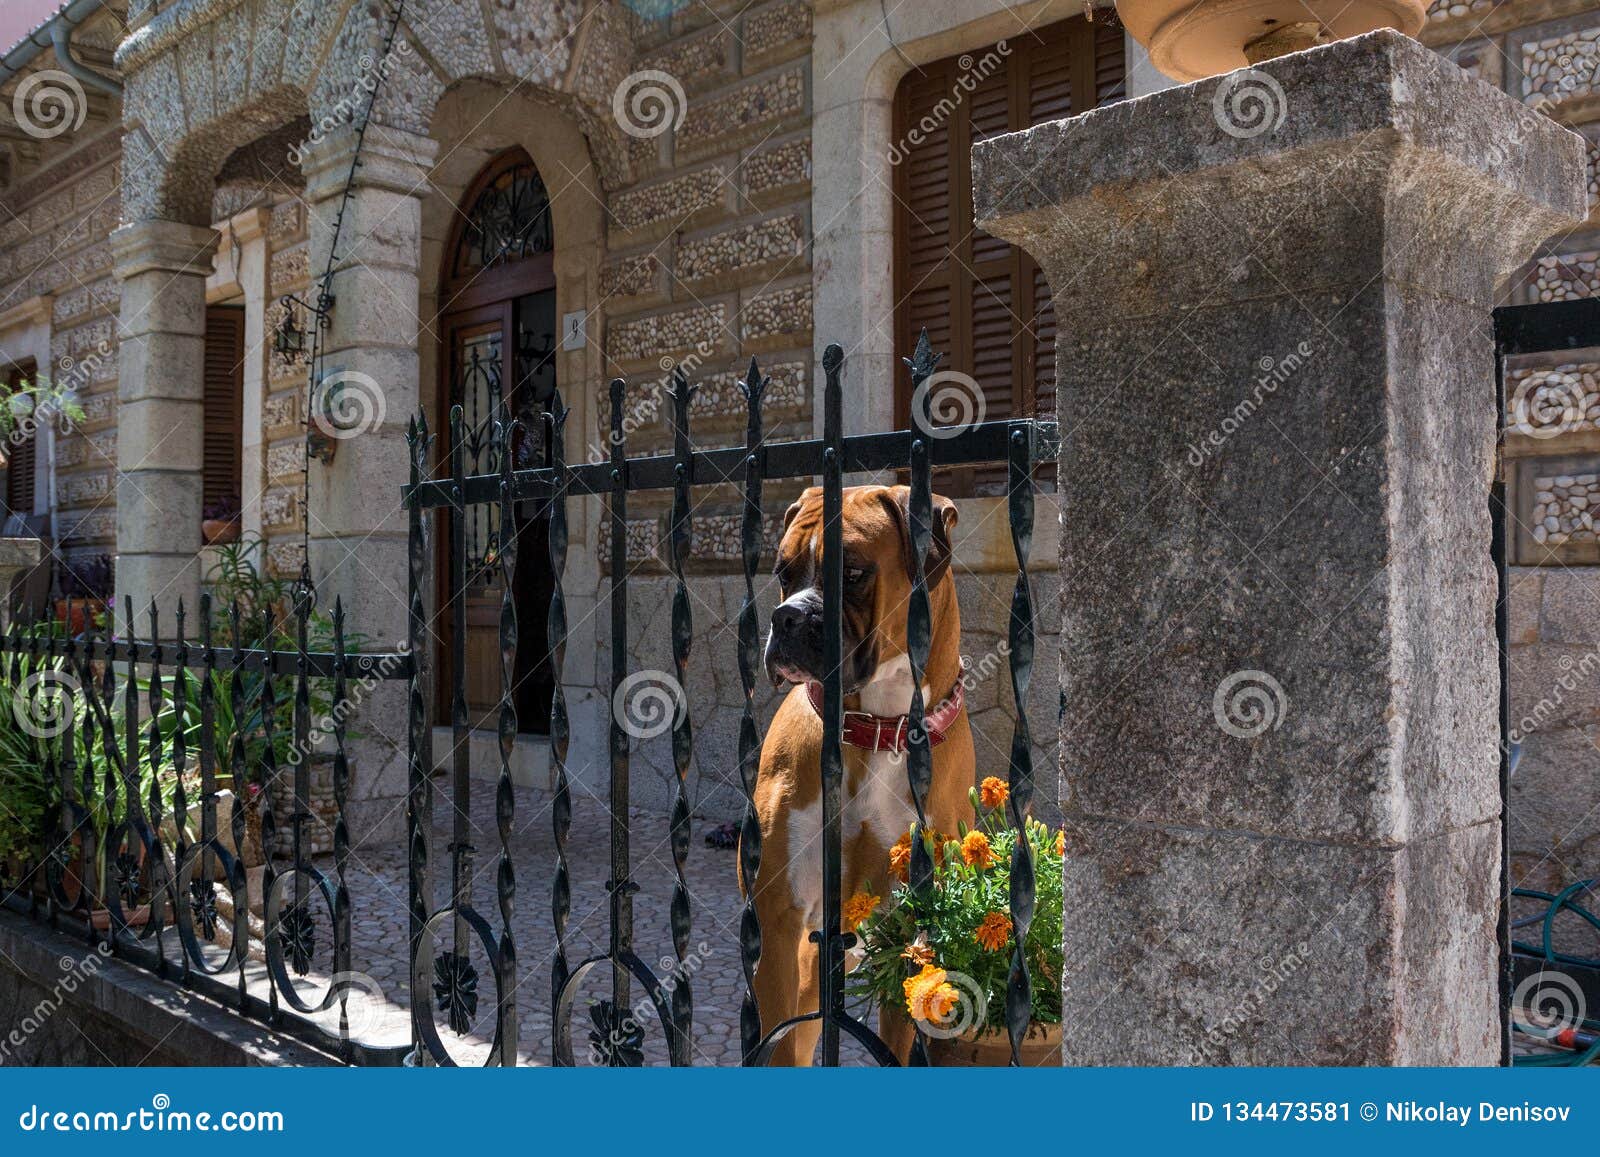 Funny Dog Breed Boxer Sitting Behind A Fence Stock Image Image of home, dirty 134473581